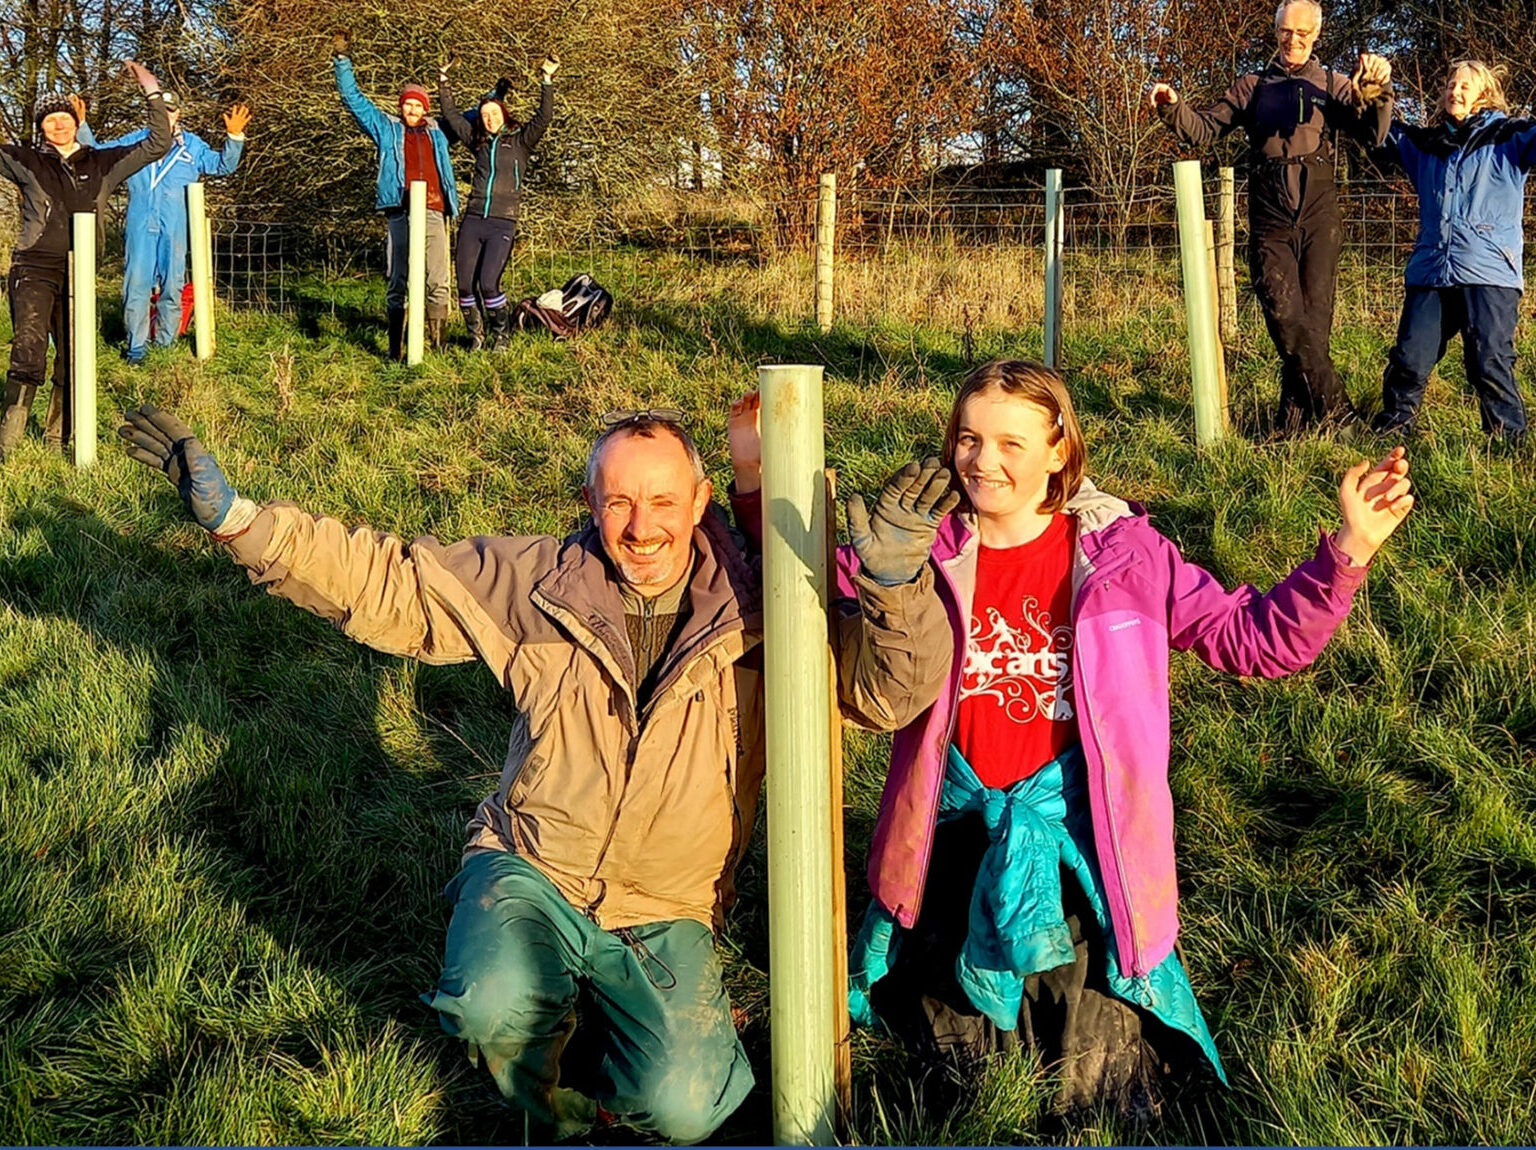 Photograph of adults and children in a field next to plastic tubes containing newly planted tree saplings